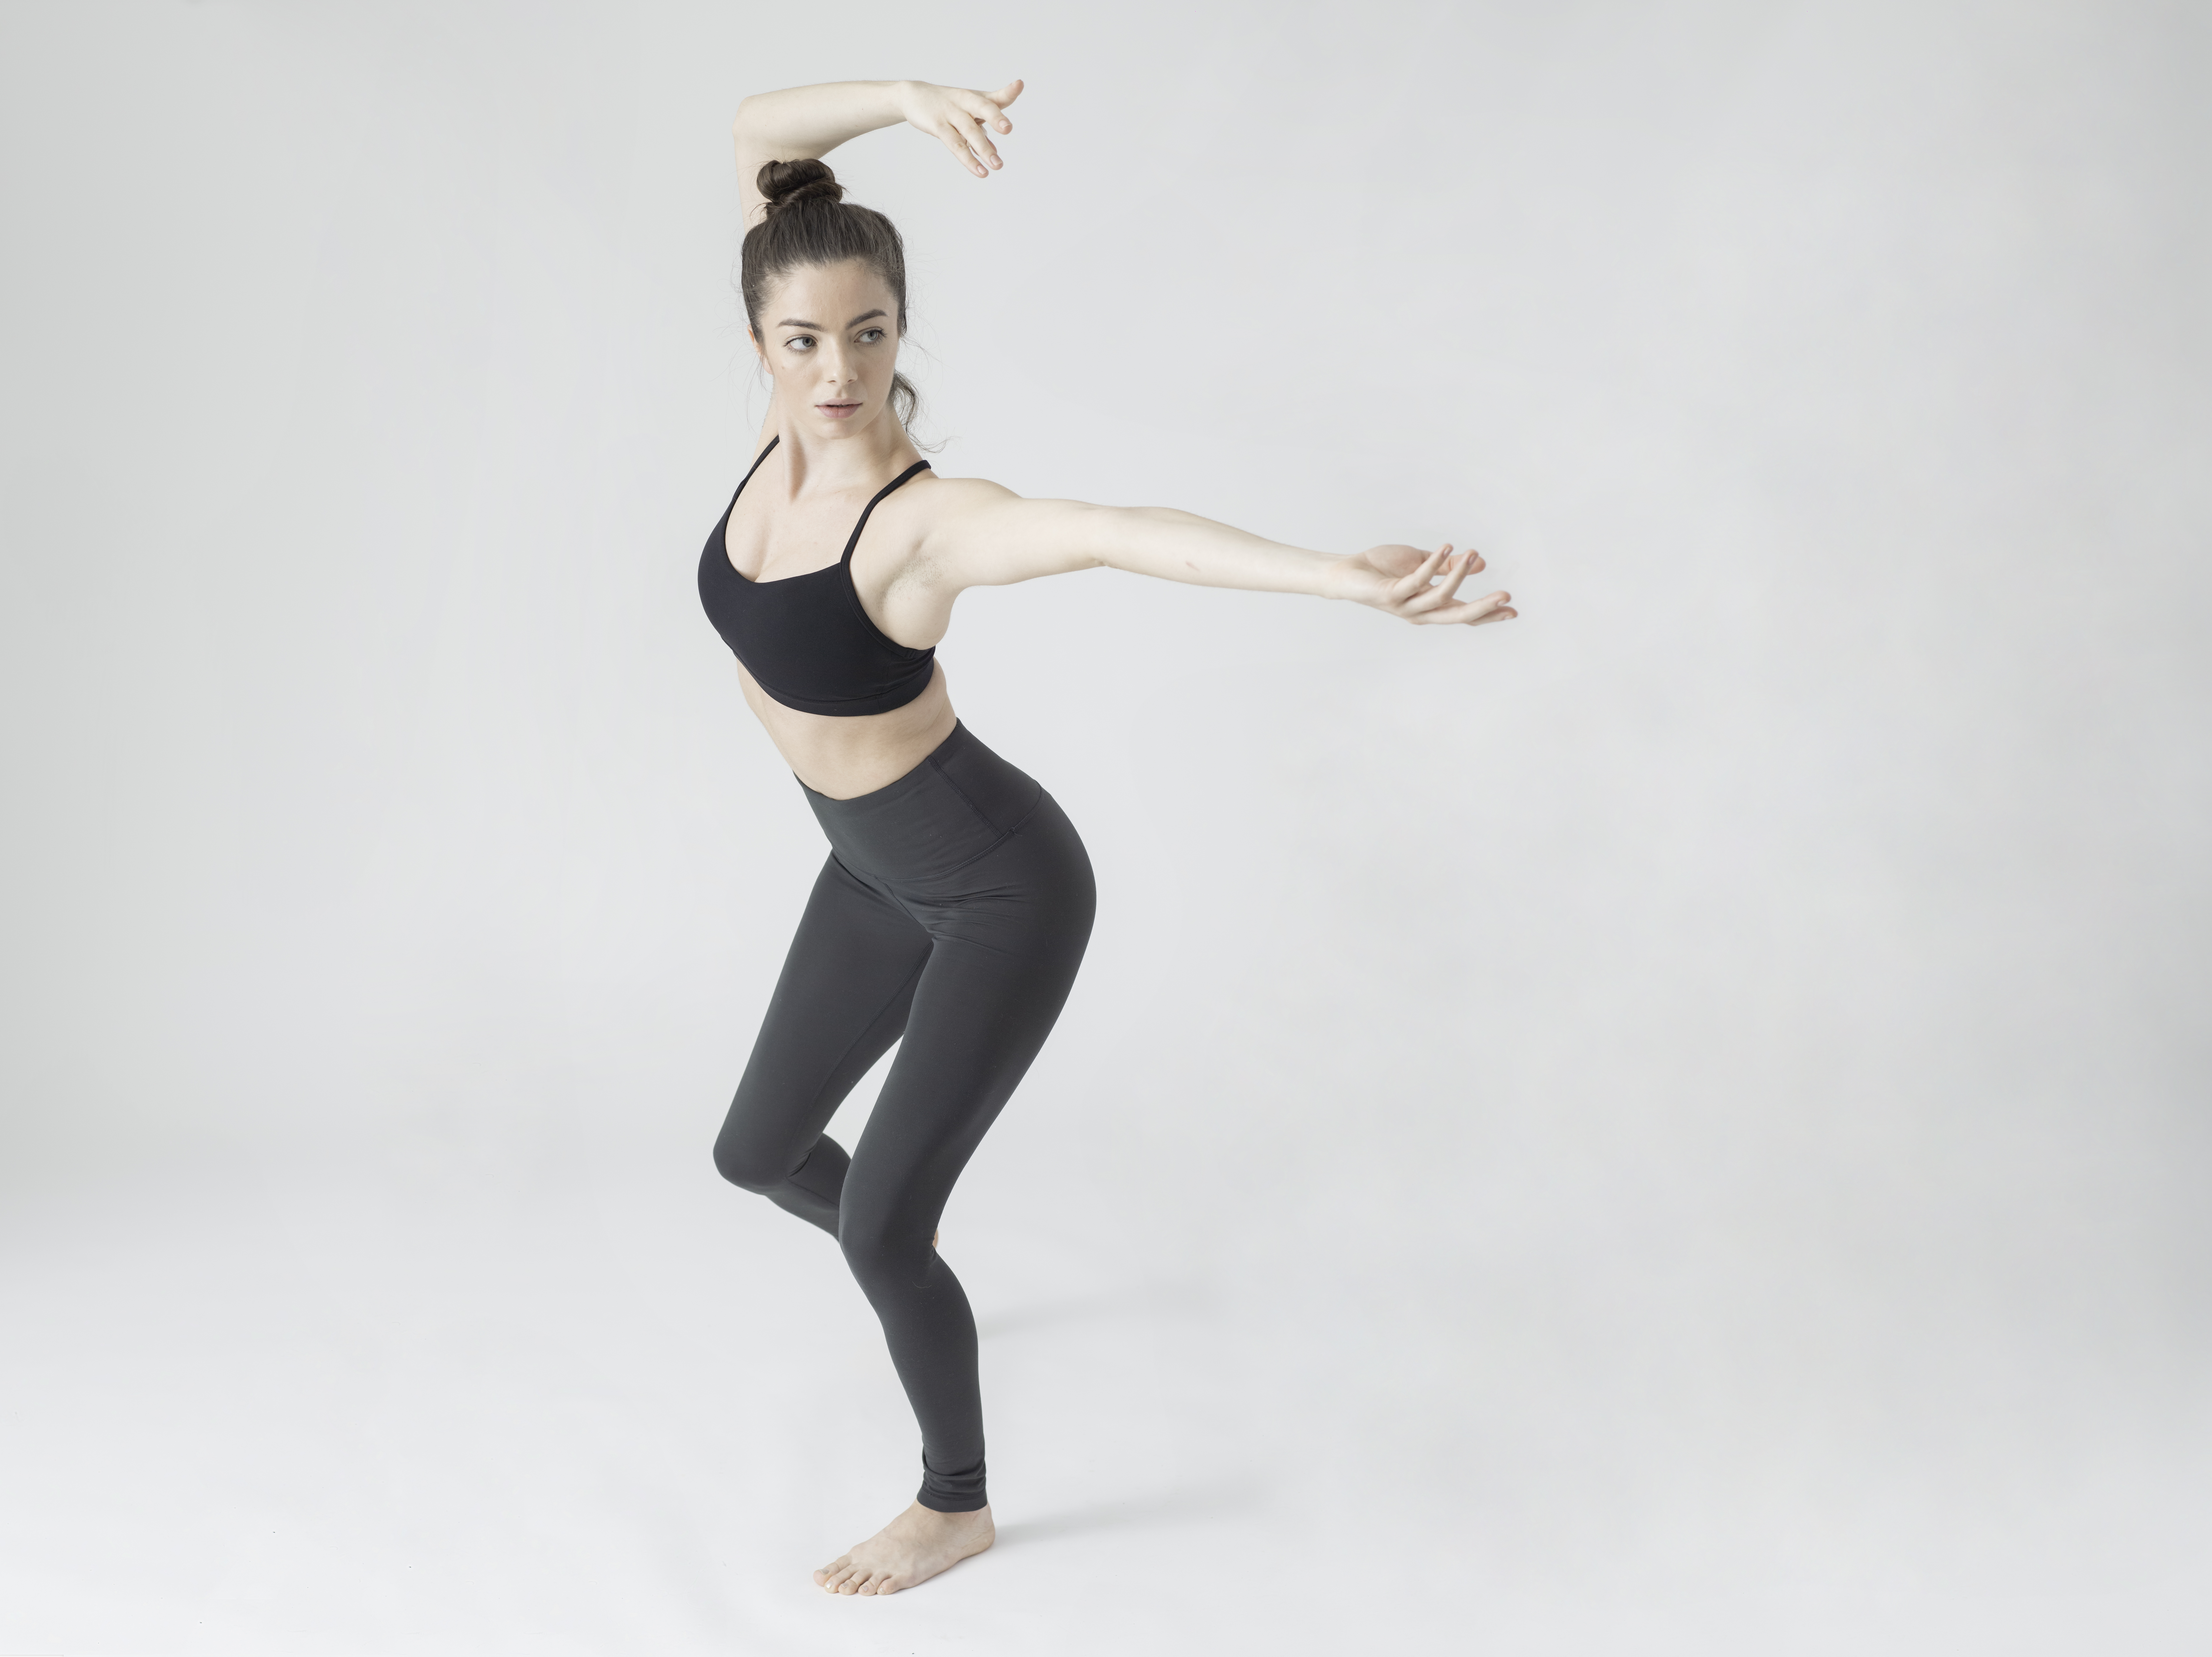 6 Dynamic New Poses You Can Try In Photos - Emma's Edition